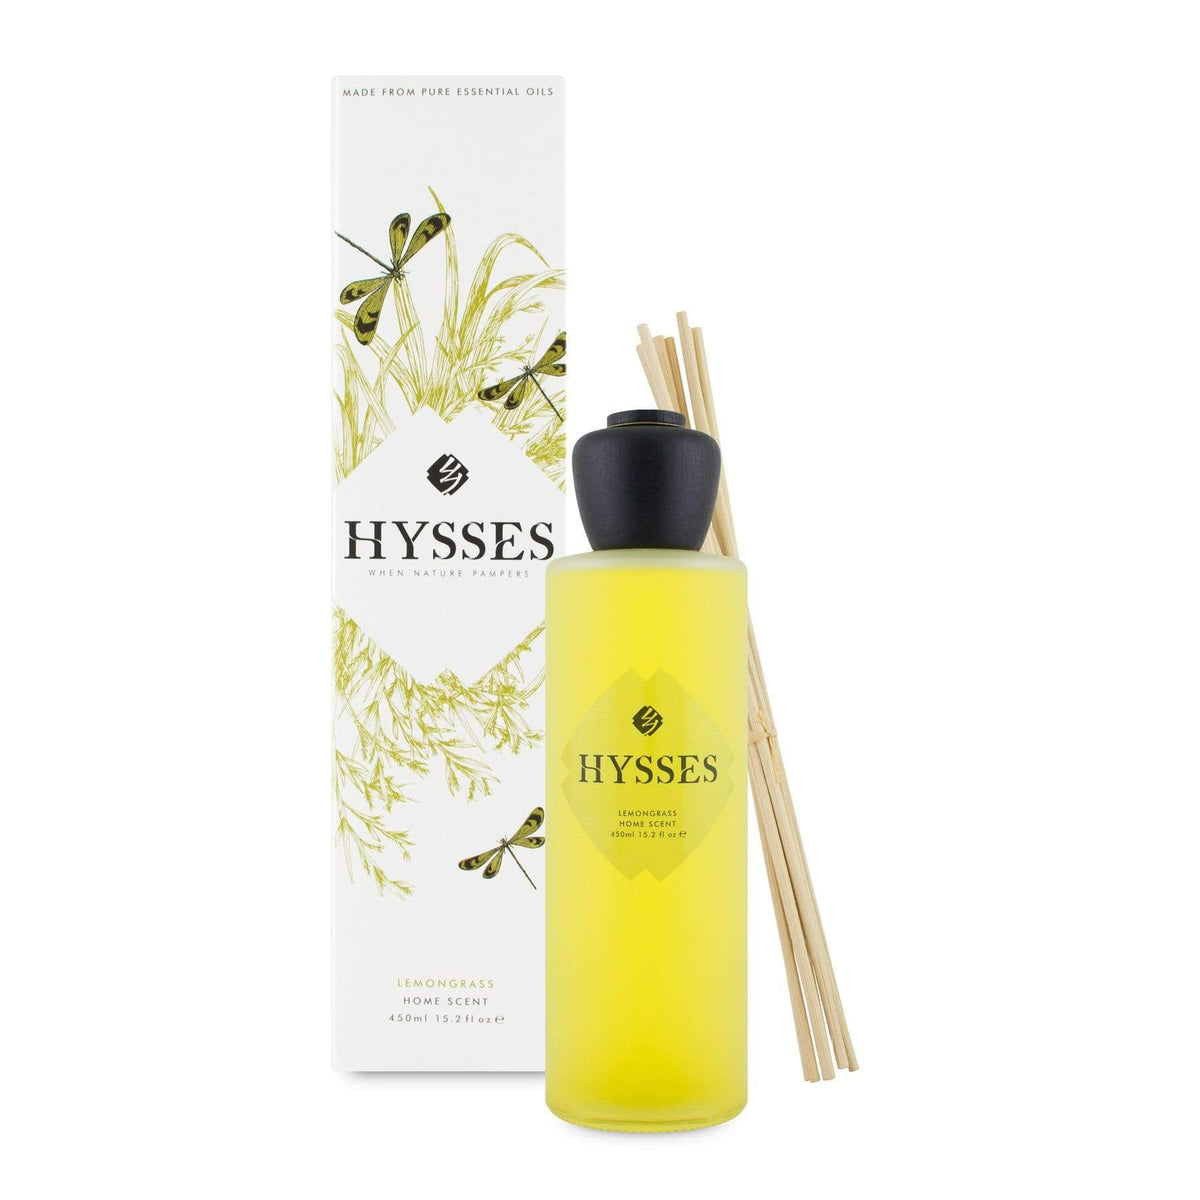 Hysses Home Scents 450ml Home Scent Reed Diffuser Lemongrass